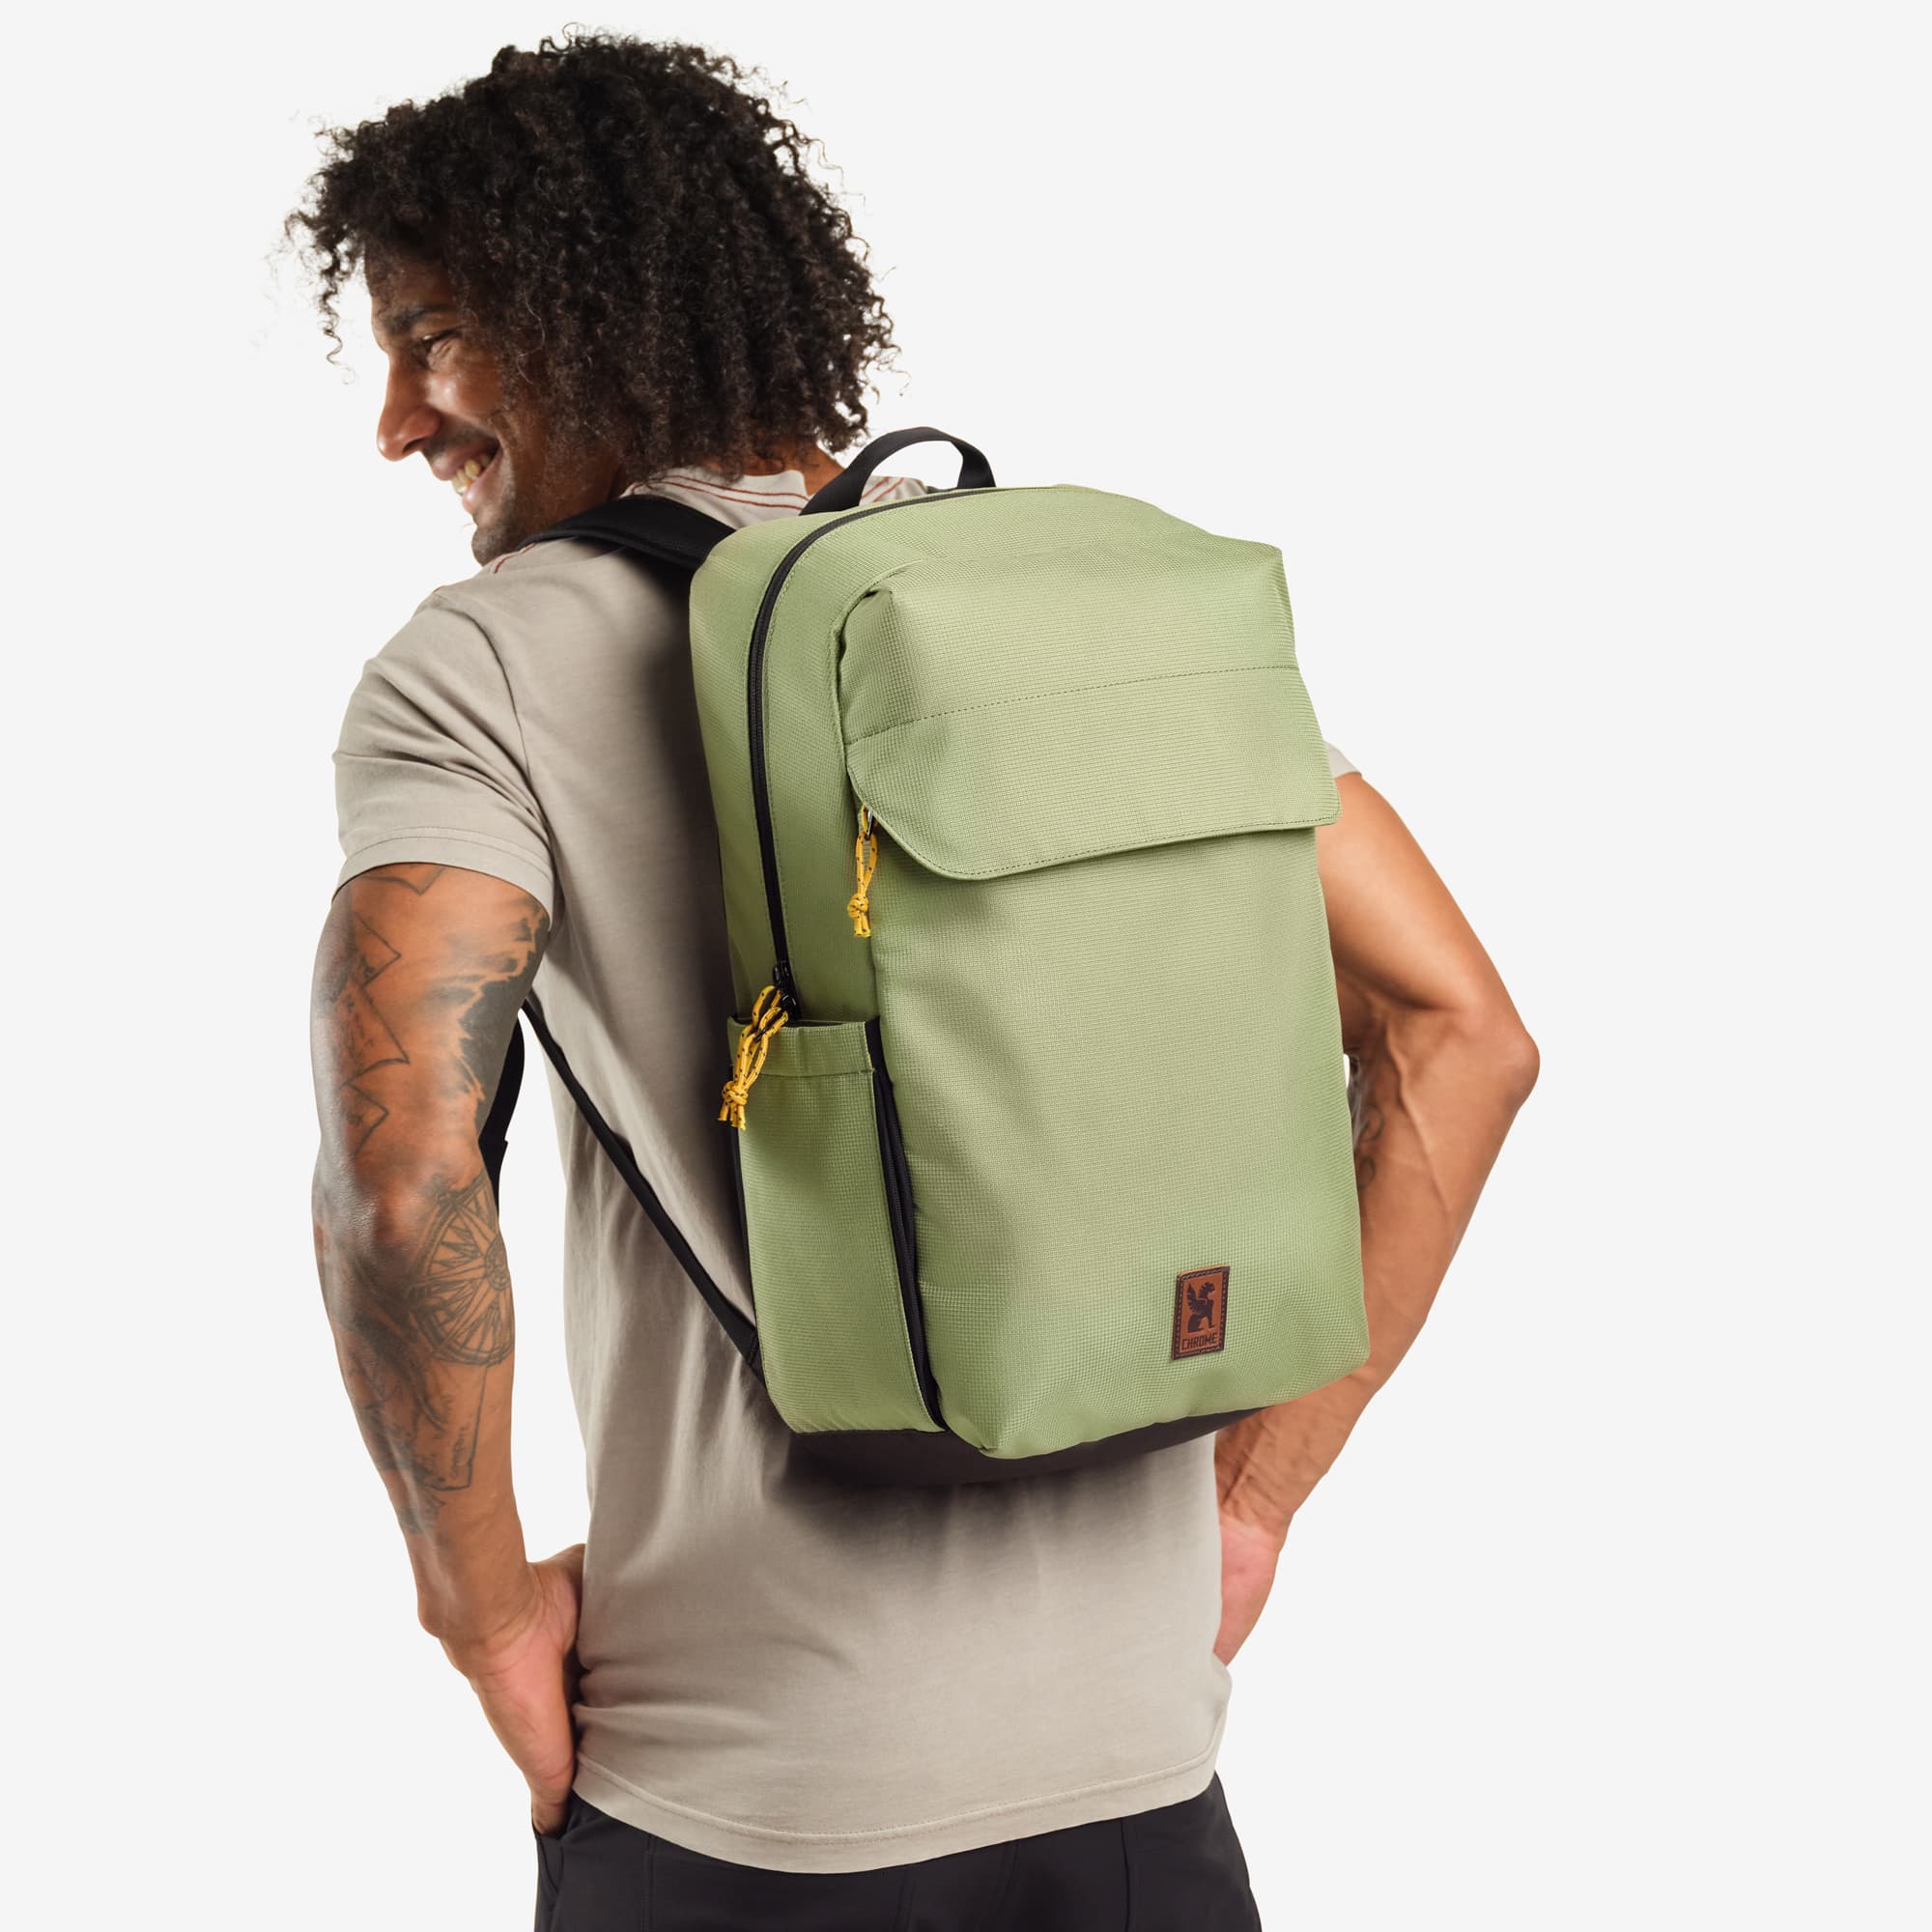 Ruckas 23L Backpack in green worn by a man #color_oil green